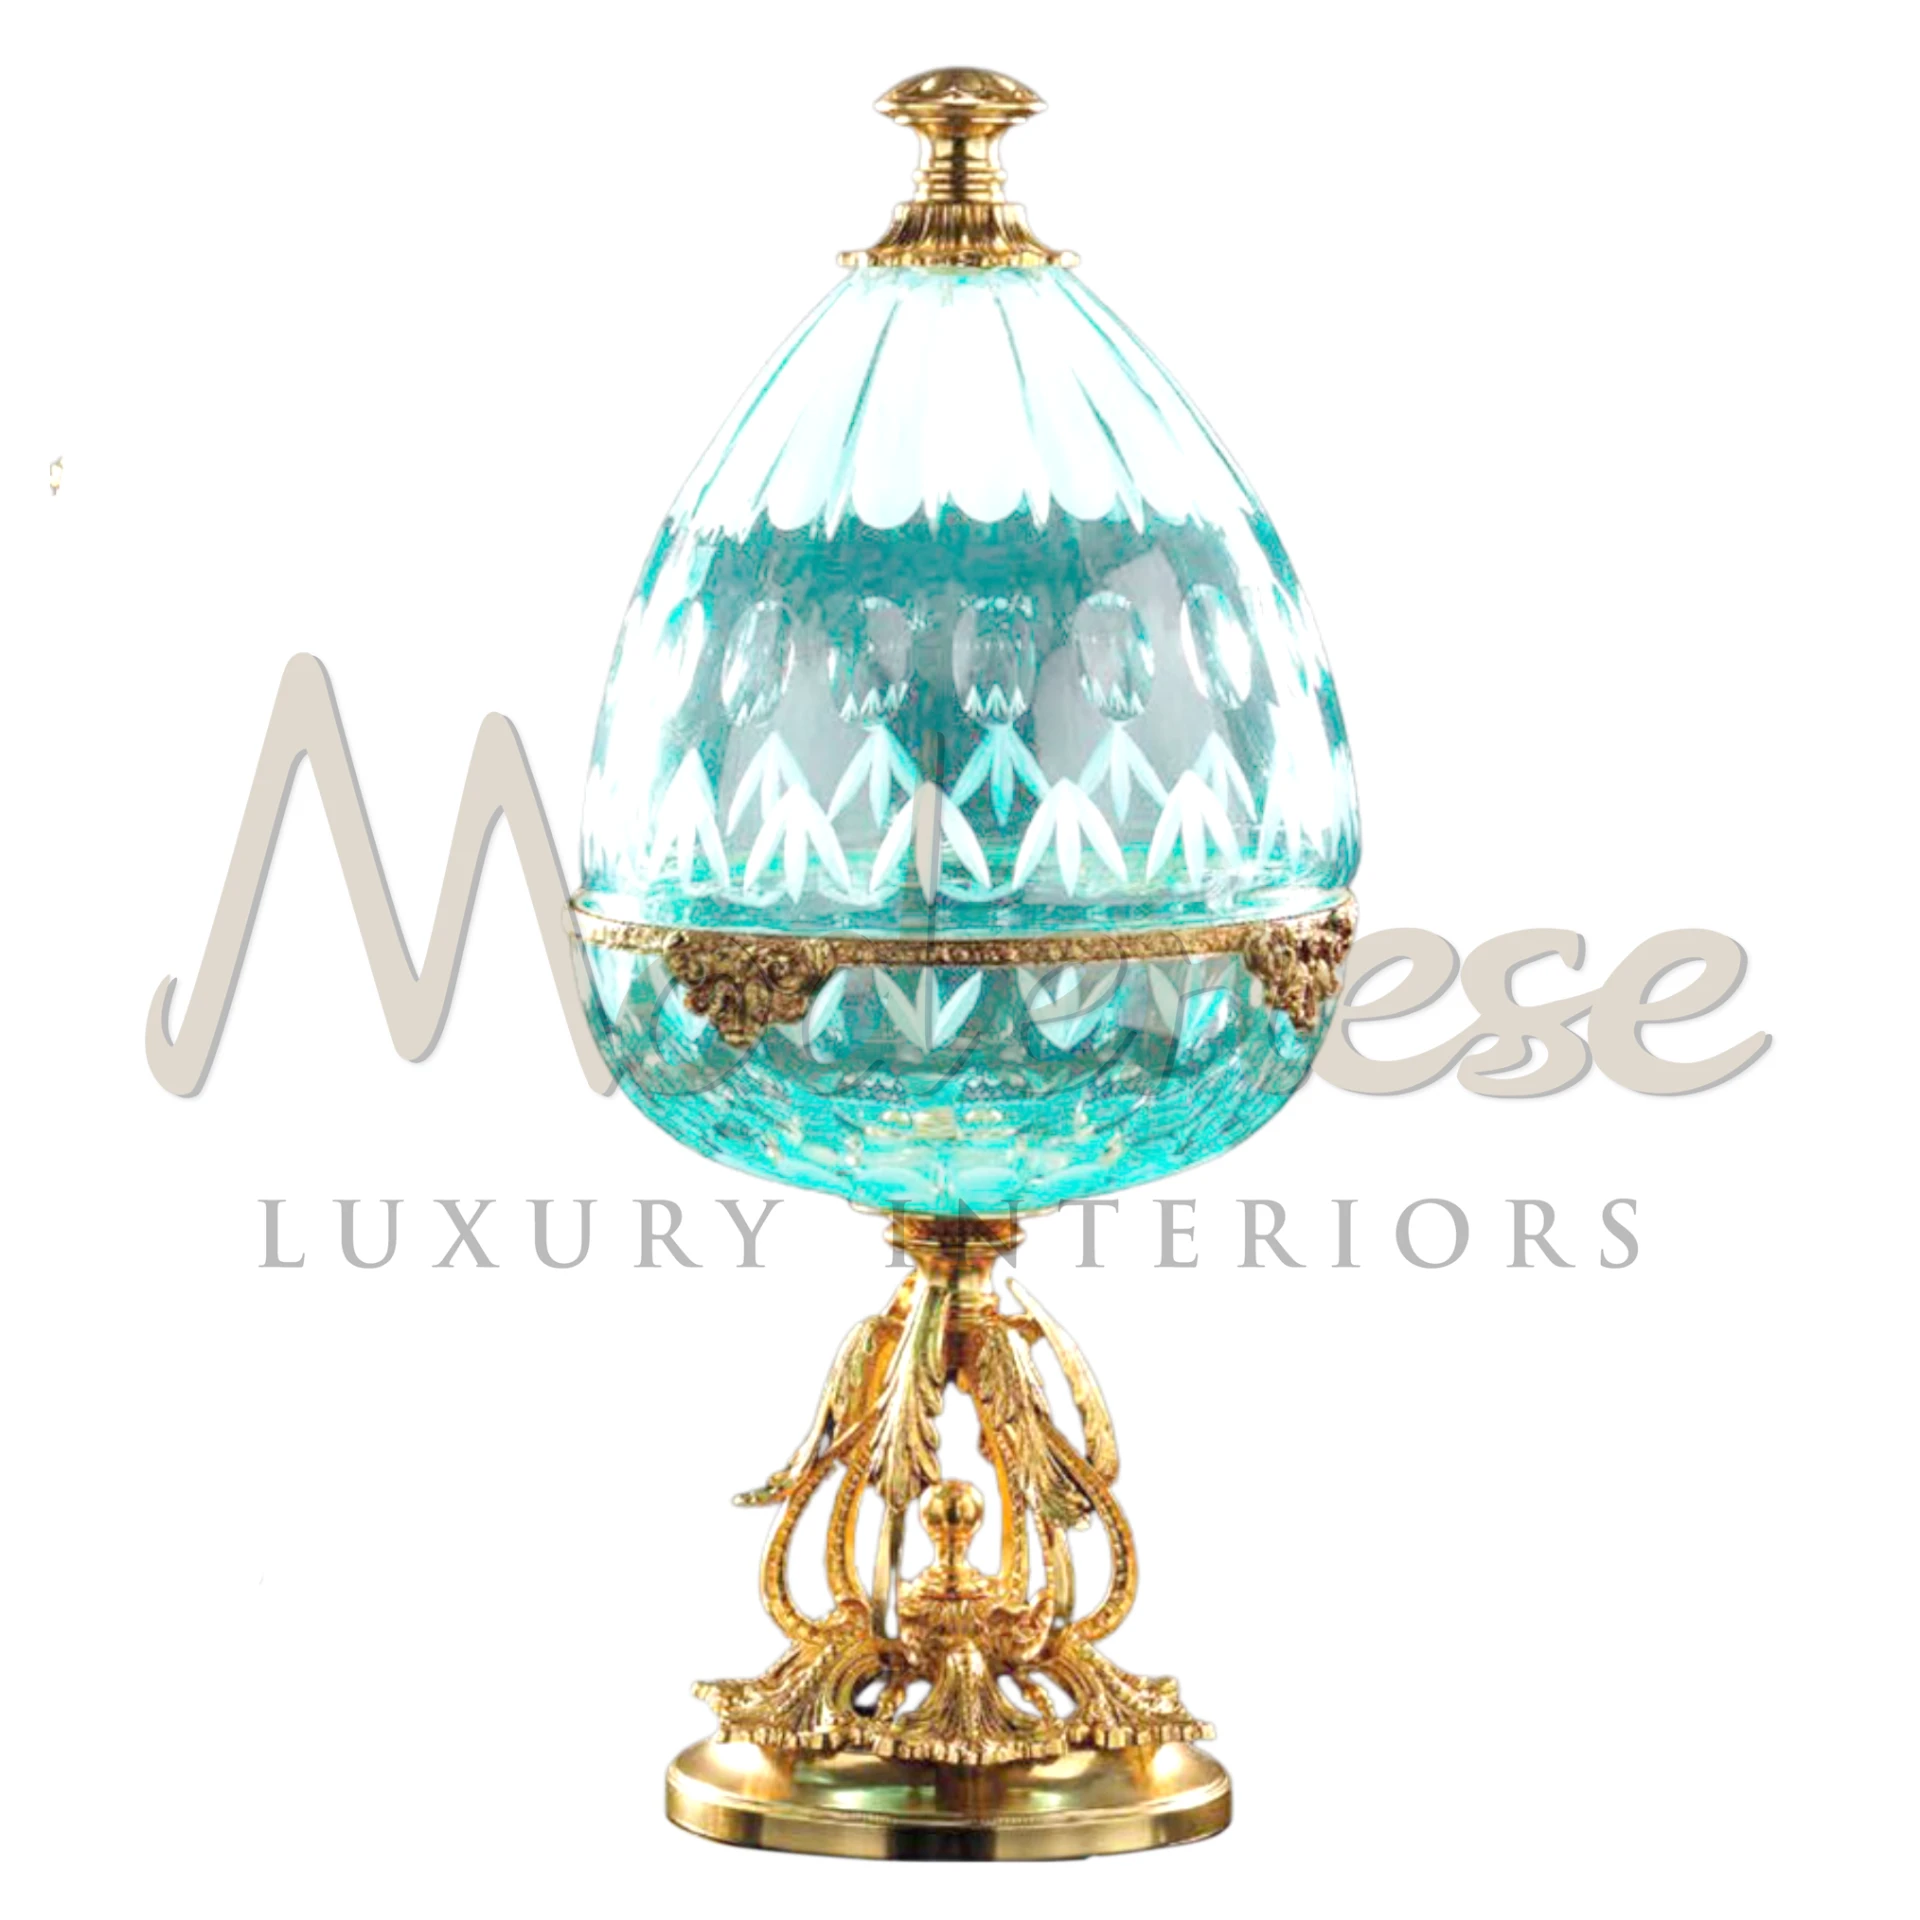 Imperial Luxury Turquoise Box, a vibrant and sophisticated storage solution, ideal for luxury interiors and treasured possessions, reflecting classic and baroque elegance.






